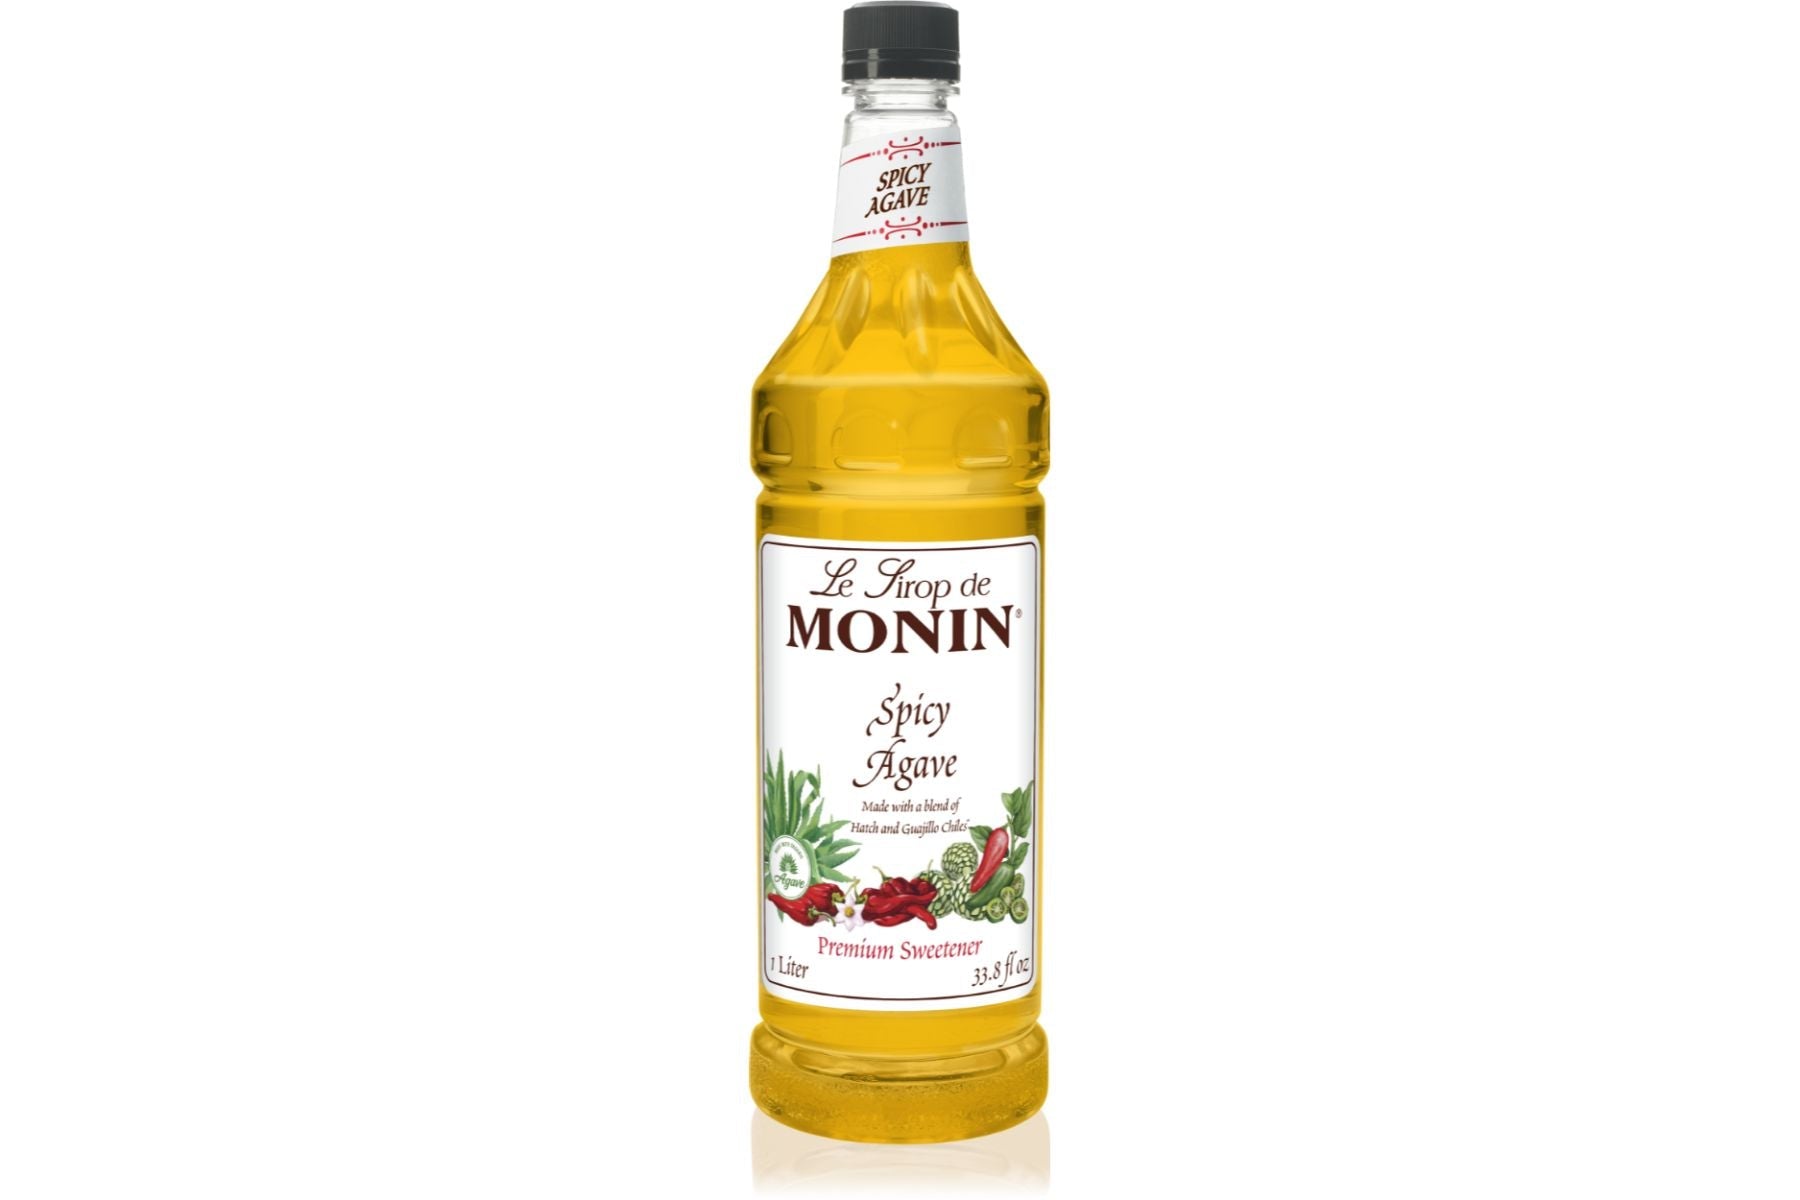 Monin Classic Syrup - 1L Plastic Bottle: Spicy Agave